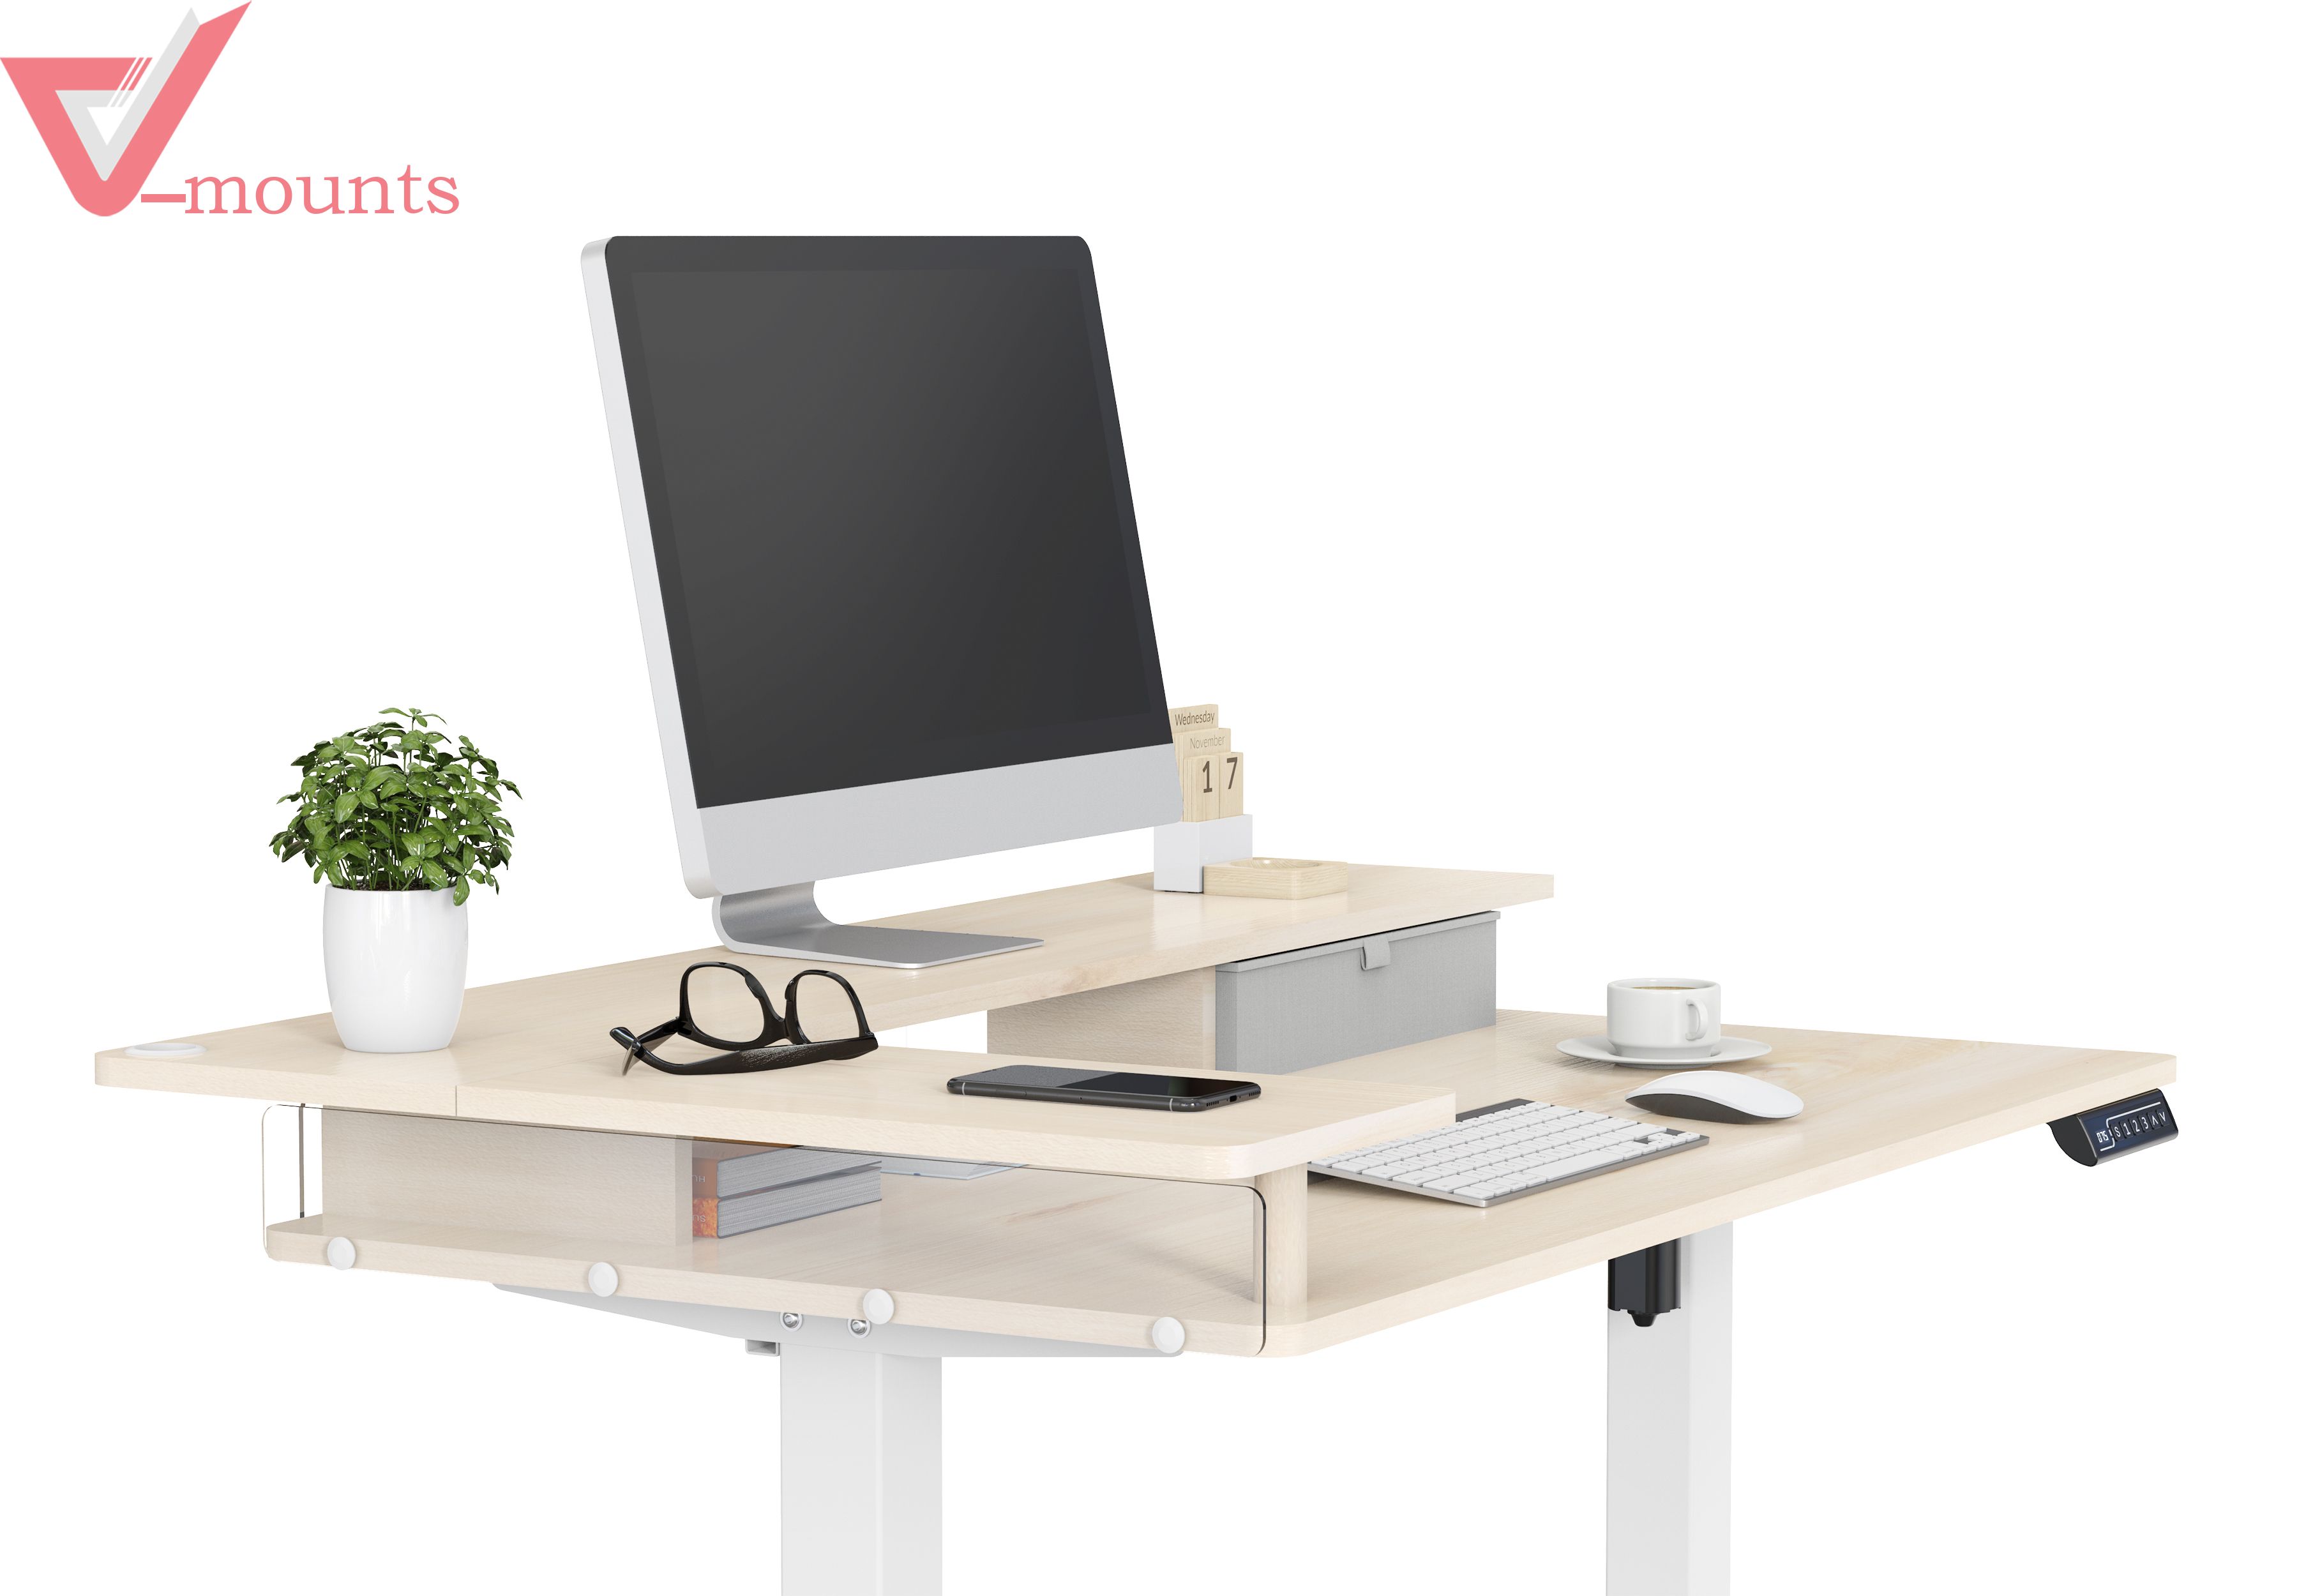 V-mounts L Shape Double-deck Electric Height Adjustable Desk With Drawer  JSD5-02-ZW-L